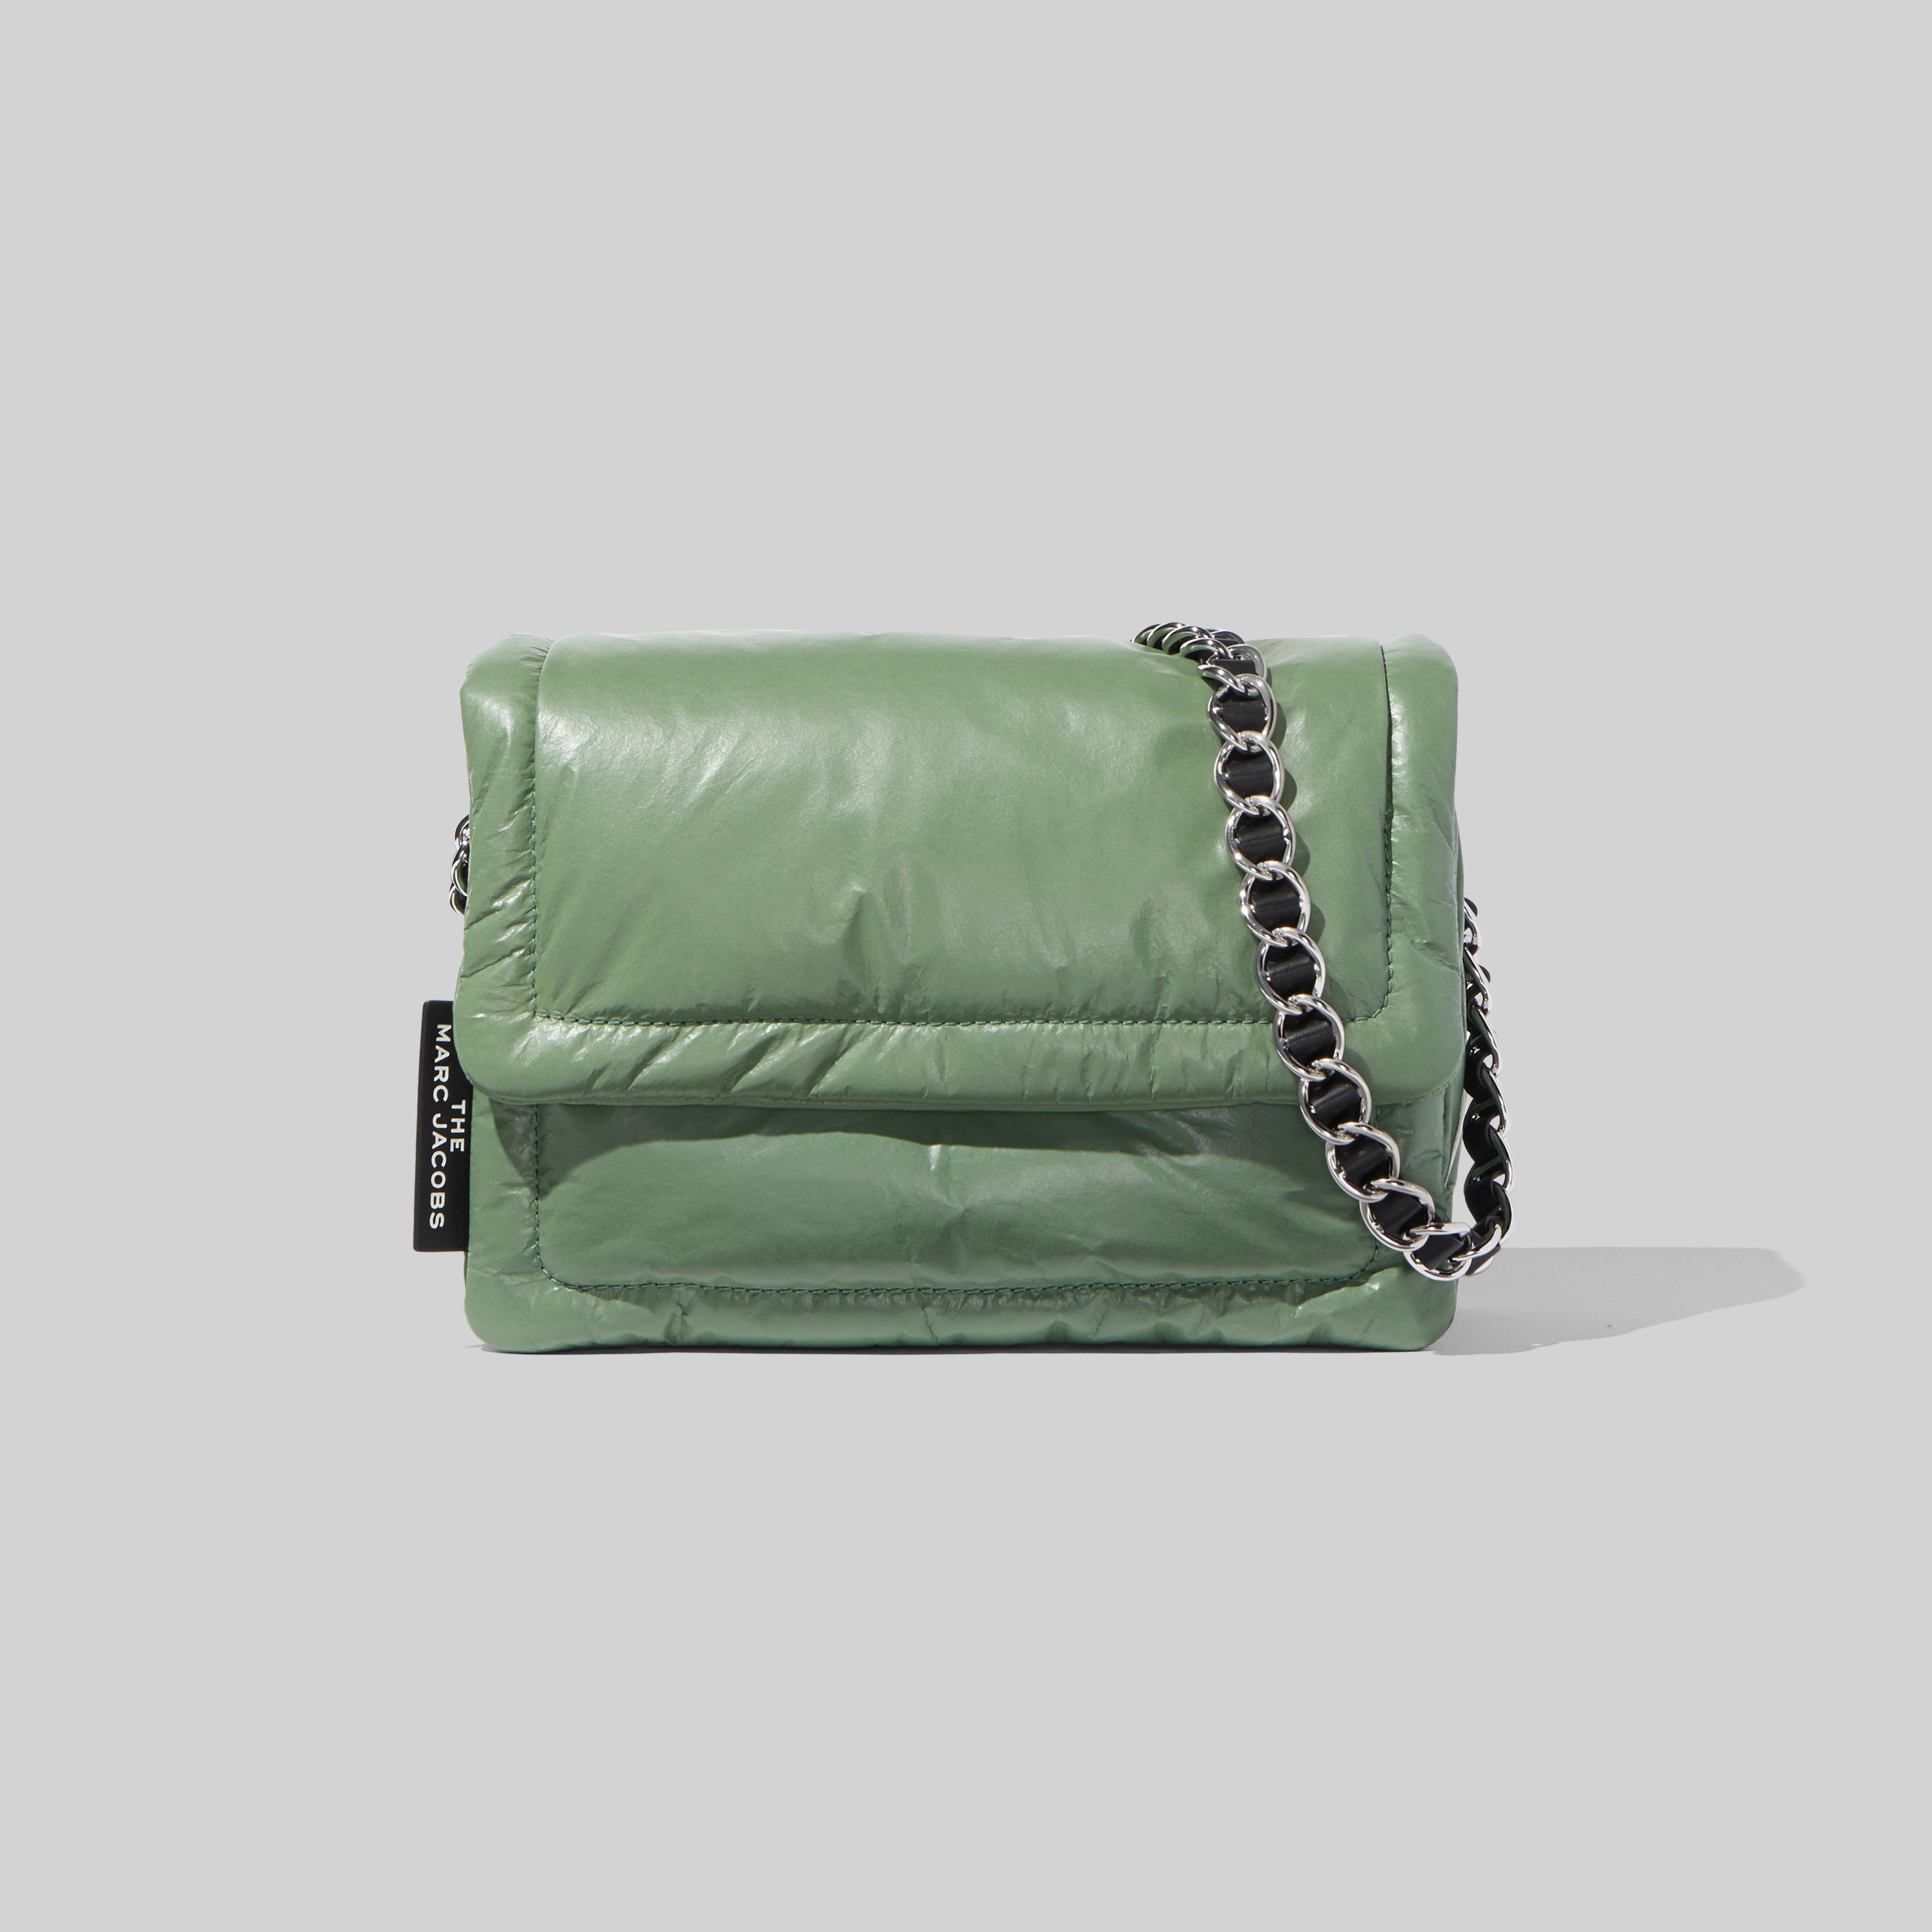 Marc Jacobs Leather The Pillow Bag in Green - Lyst